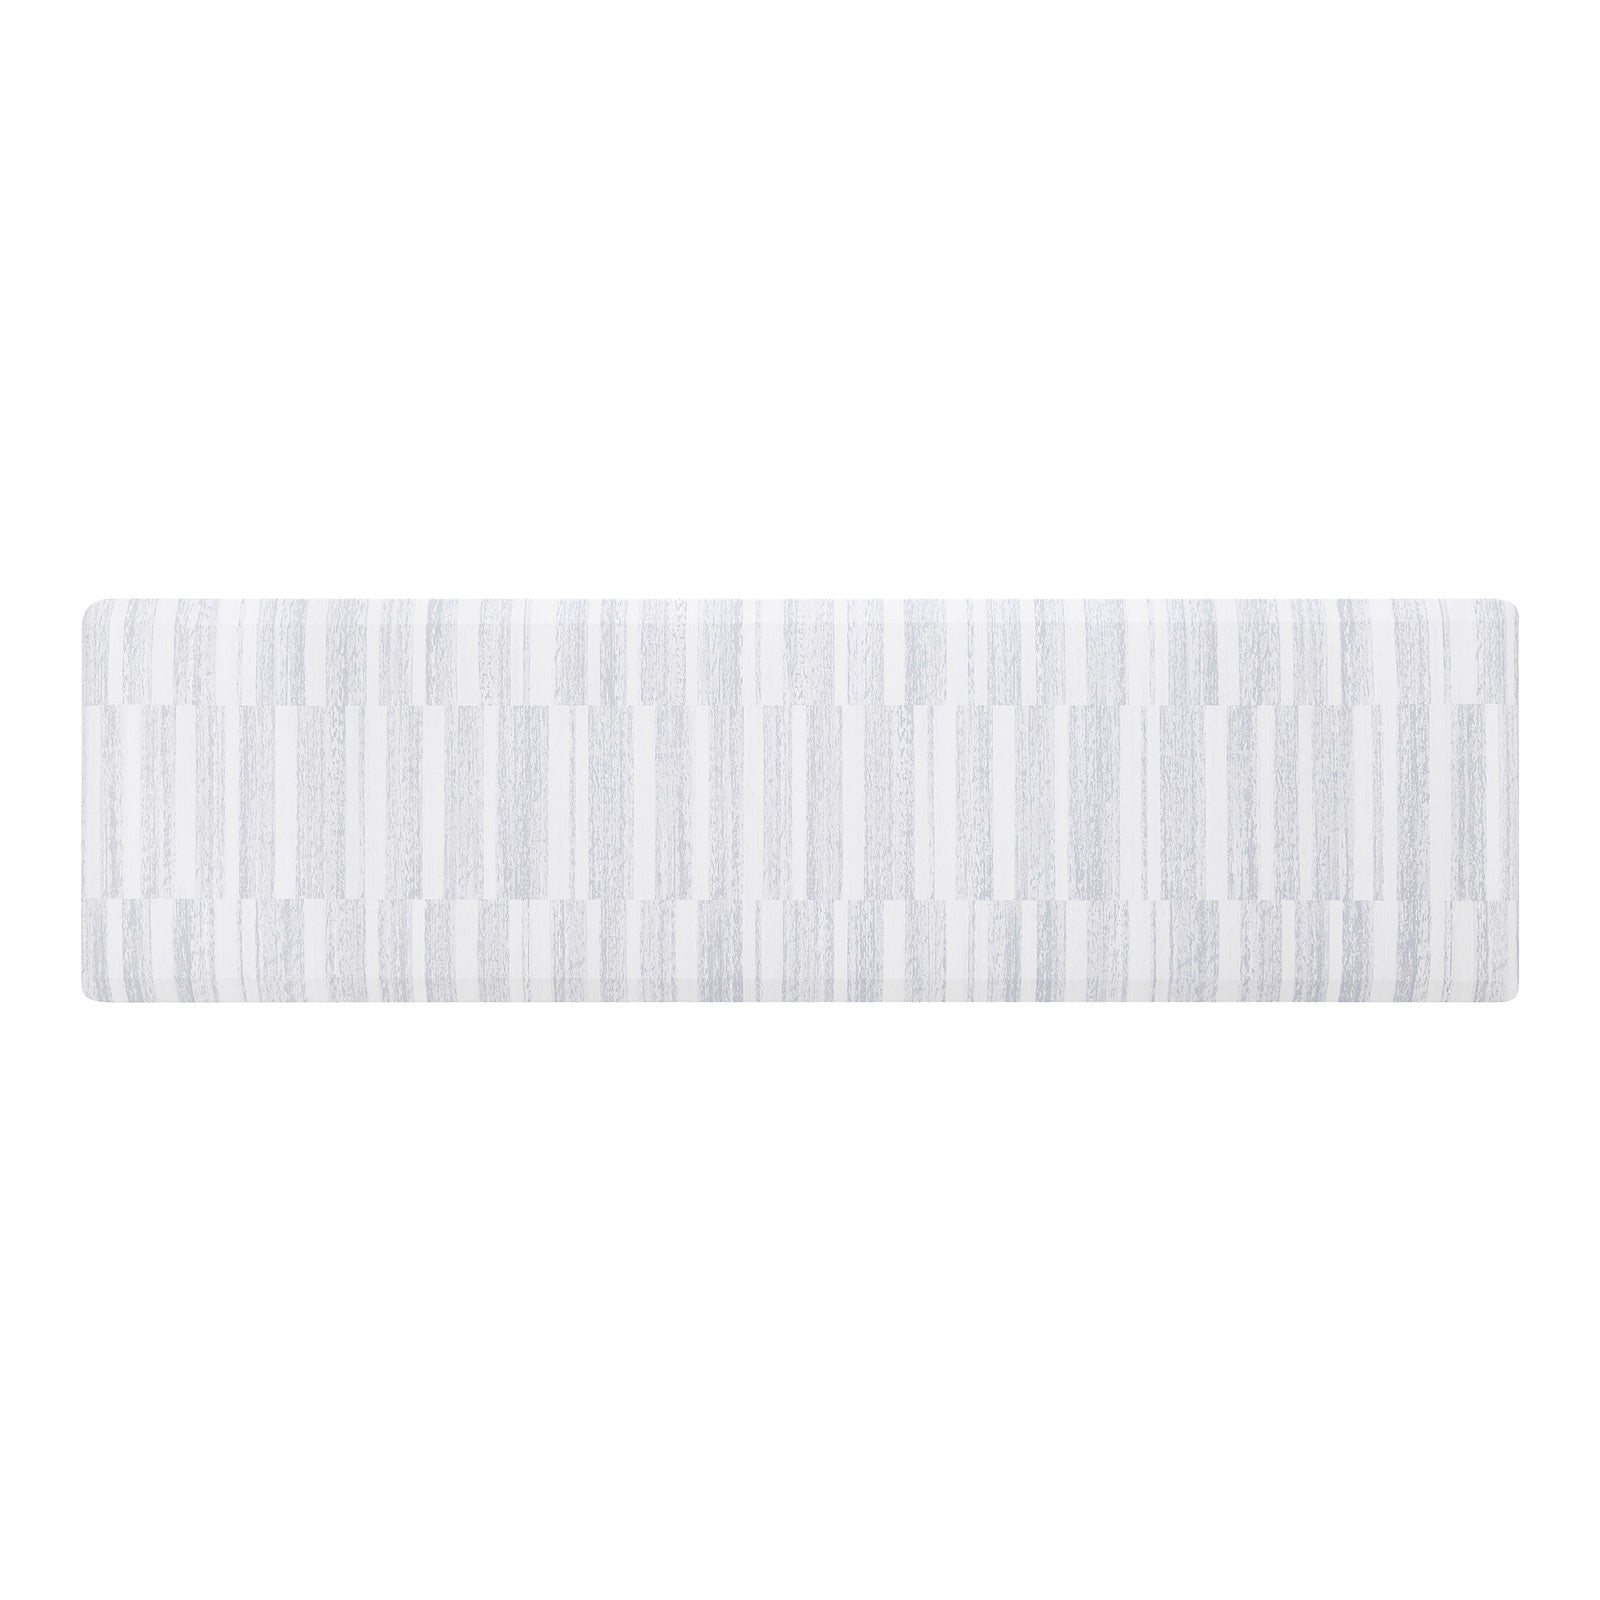 Overhead image of sutton stripe heather gray and white inverted stripe standing mat shown in size 30x108